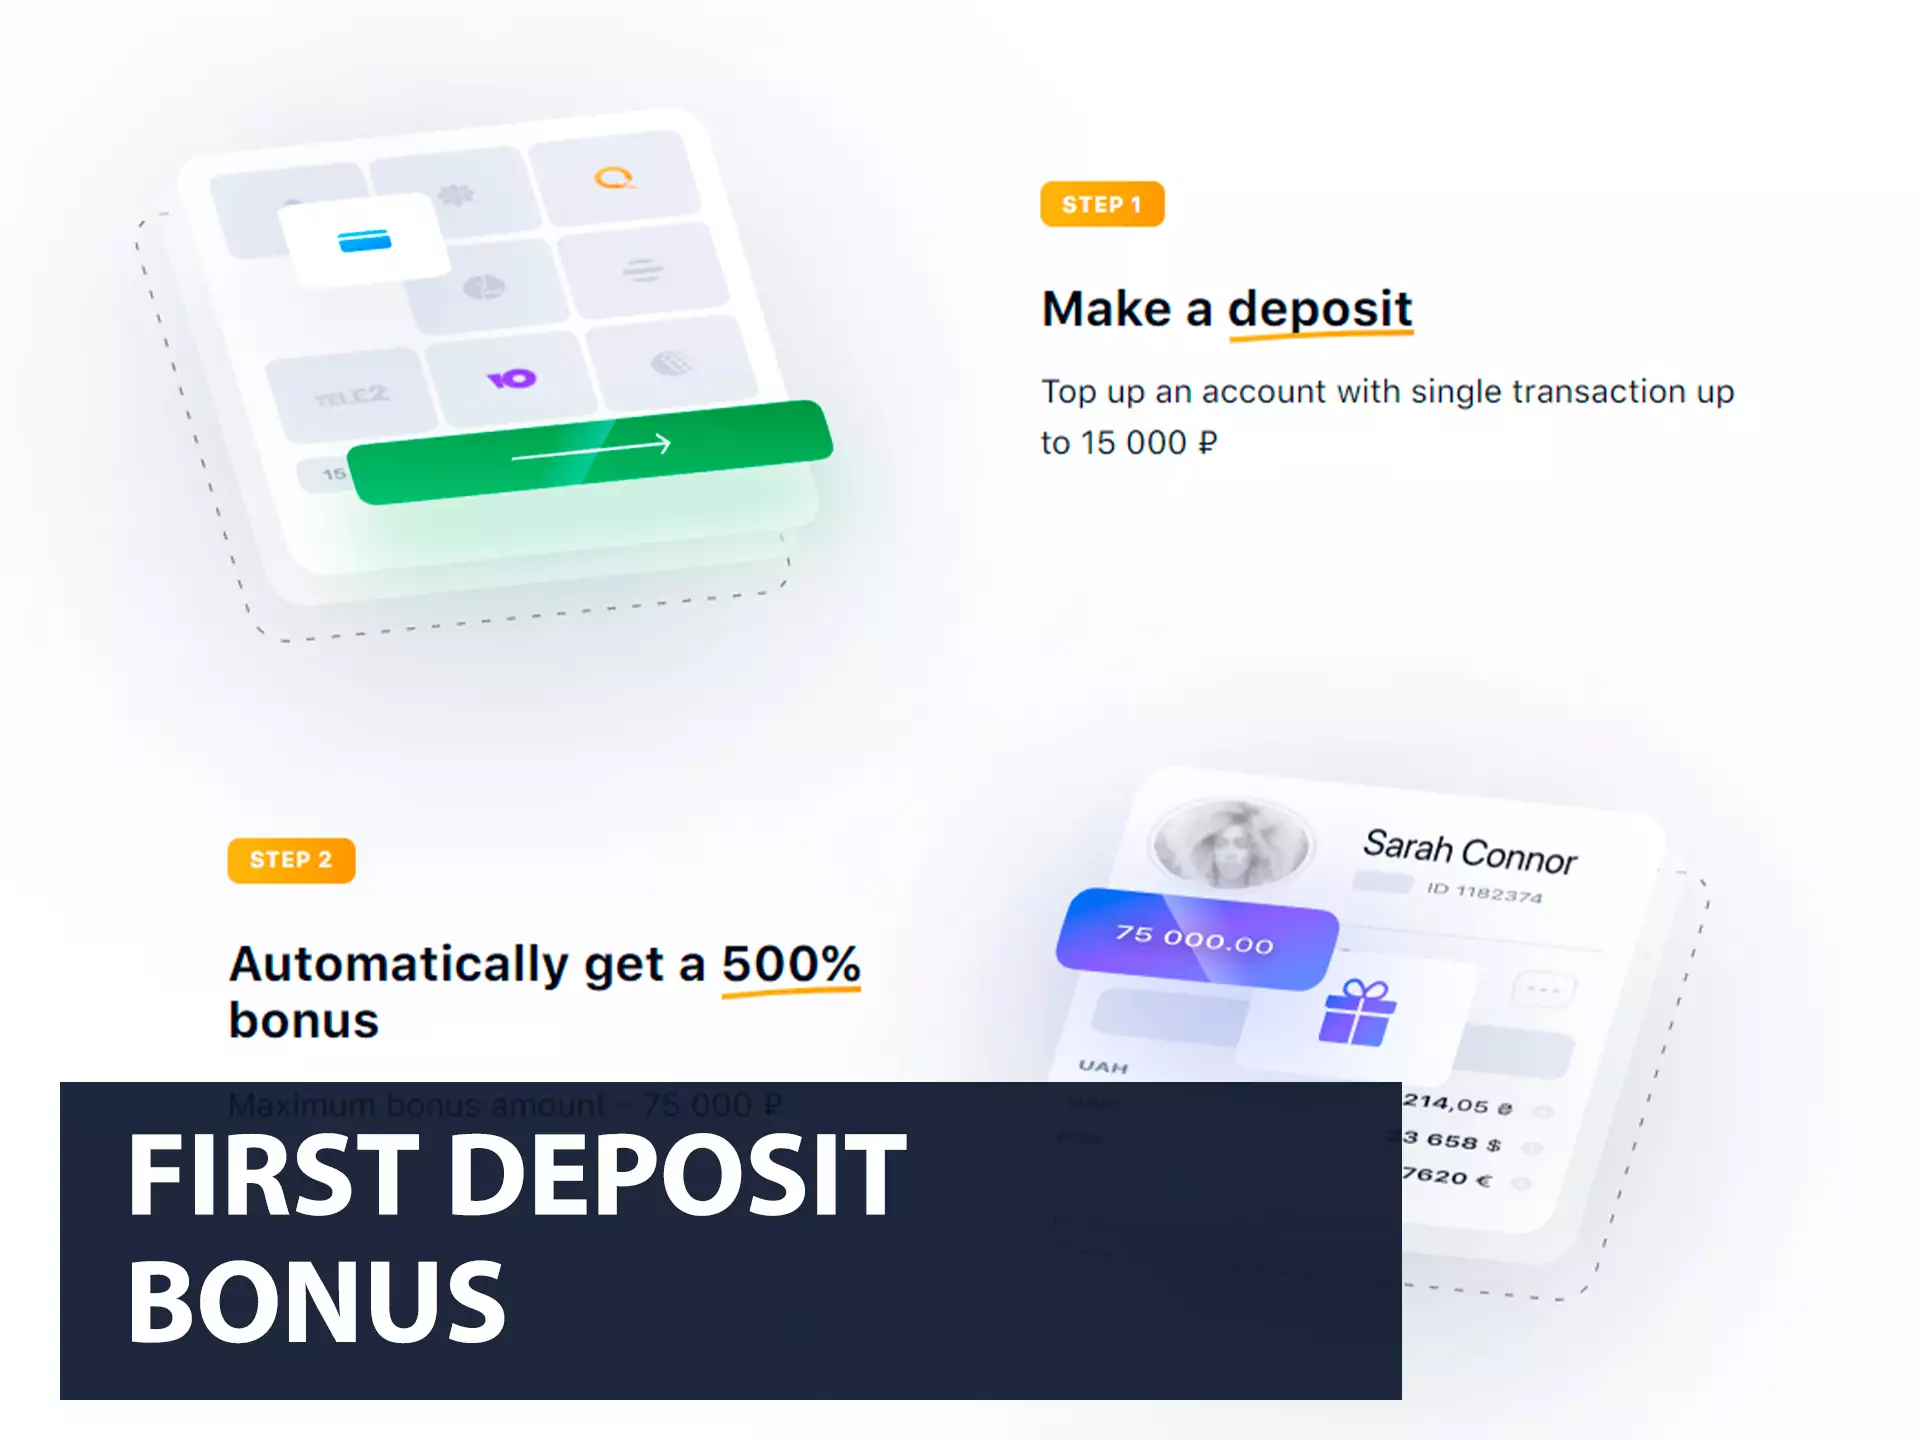 If you are a new user, you can get the bonus on your first deposit to 1win.